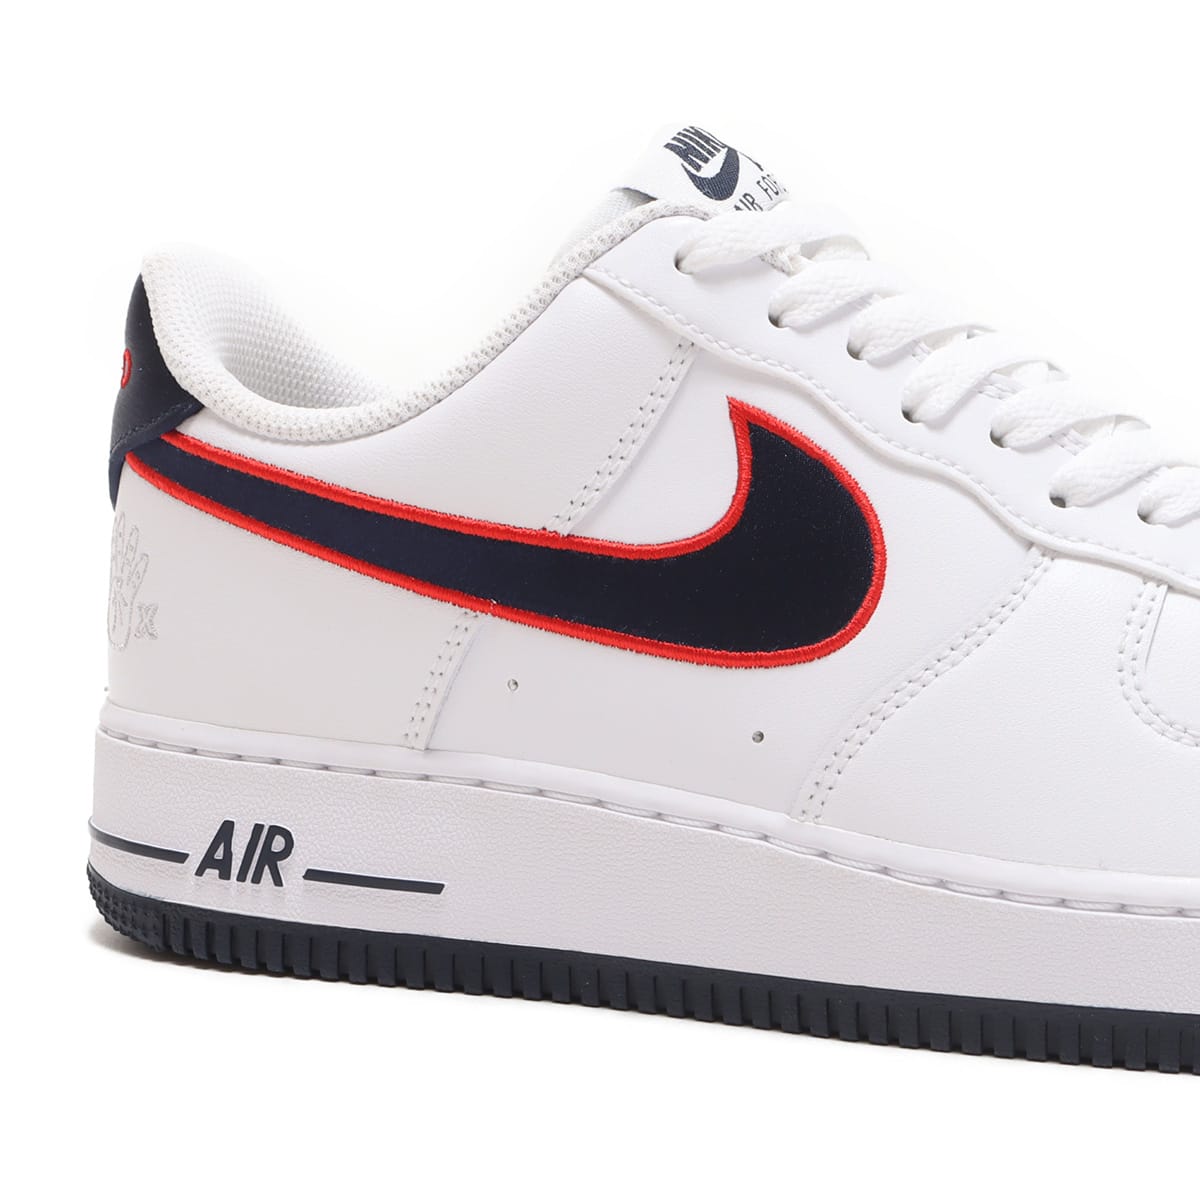 NIKE WMNS AIR FORCE 1 '07 REC WHITE/OBSIDIAN-UNIVERSITY RED-WOLF ...